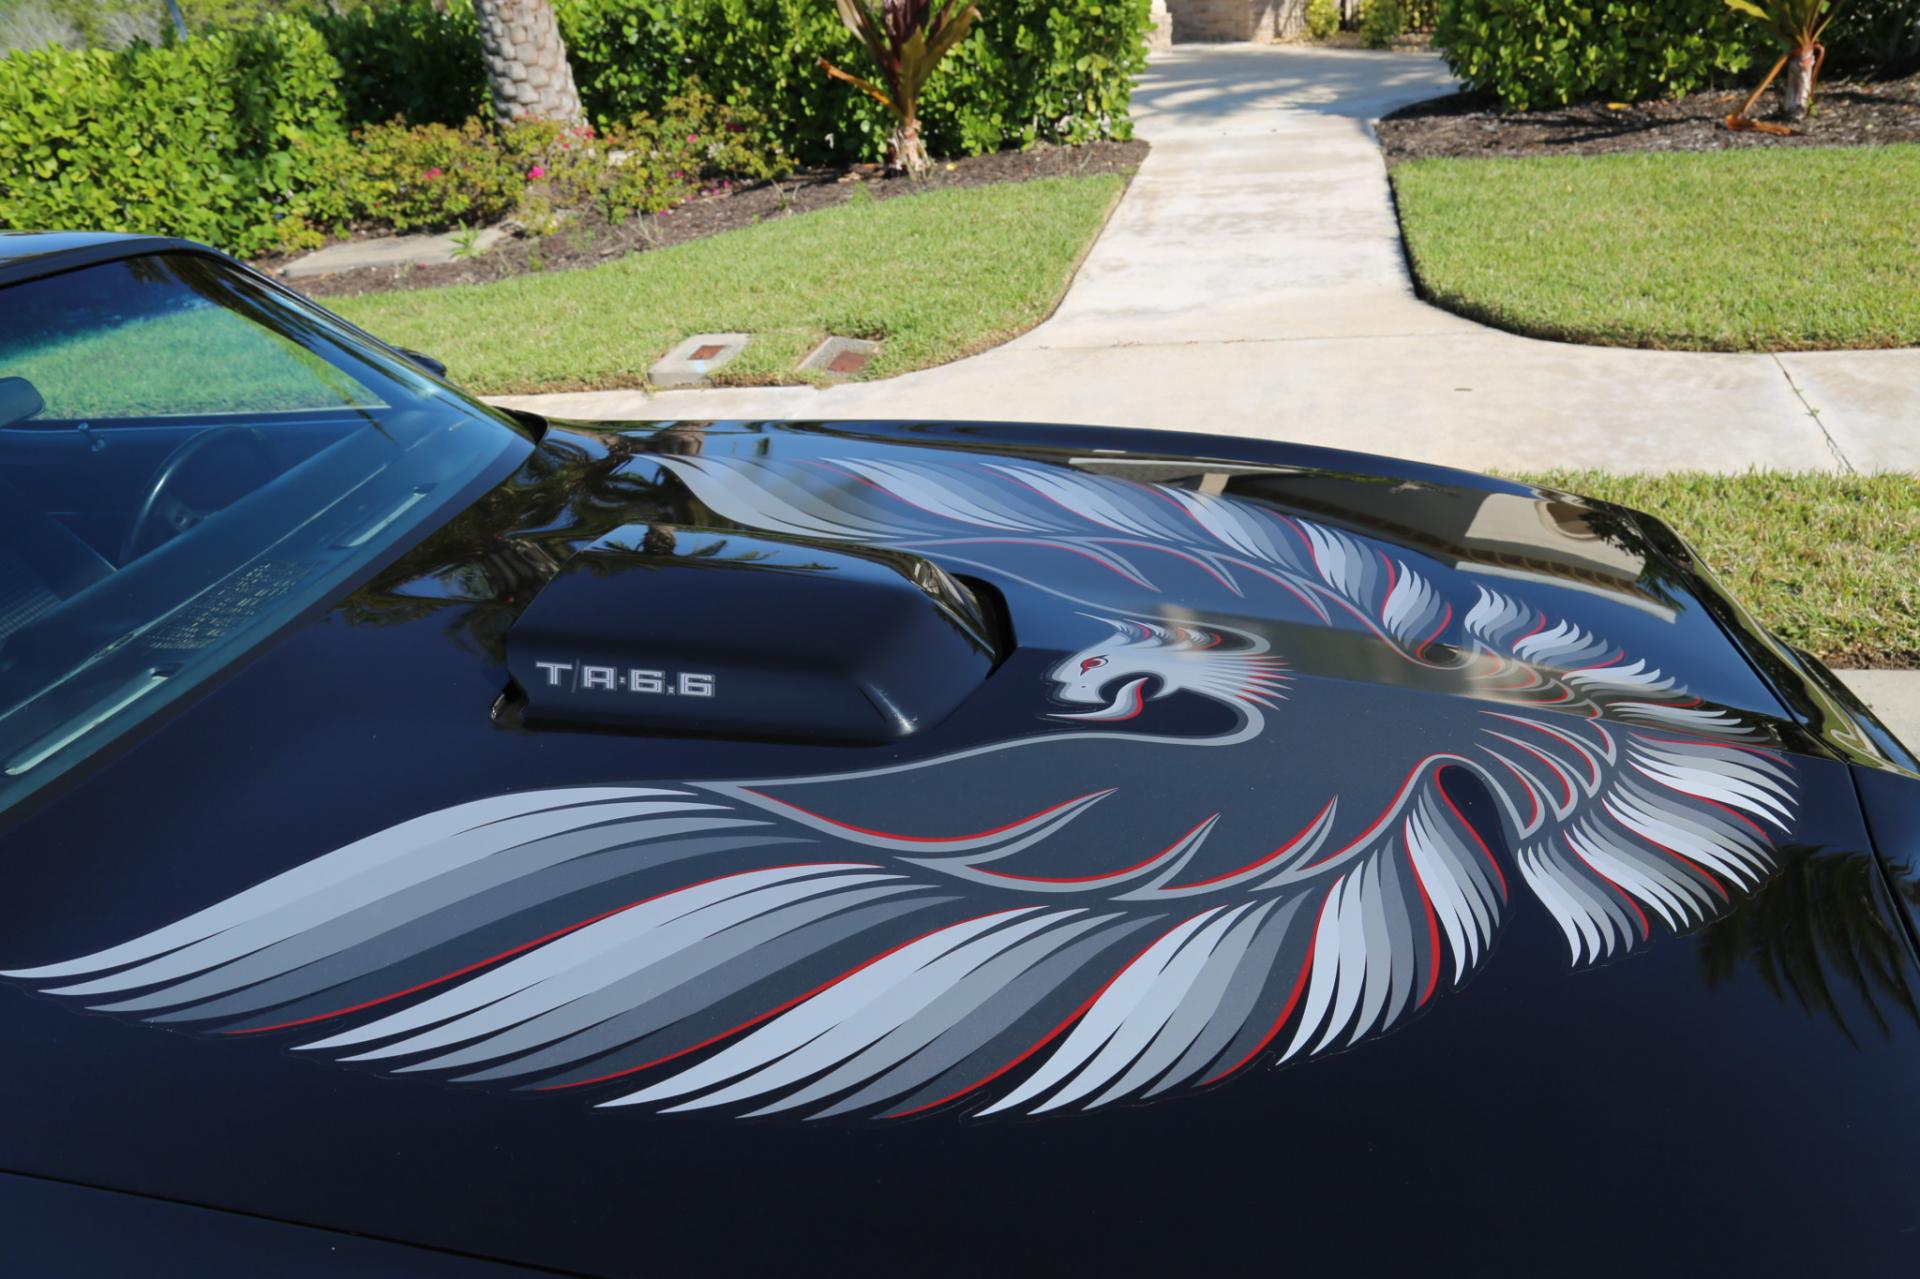 Used 1980 Pontiac Trans Am for sale Sold at Muscle Cars for Sale Inc. in Fort Myers FL 33912 7